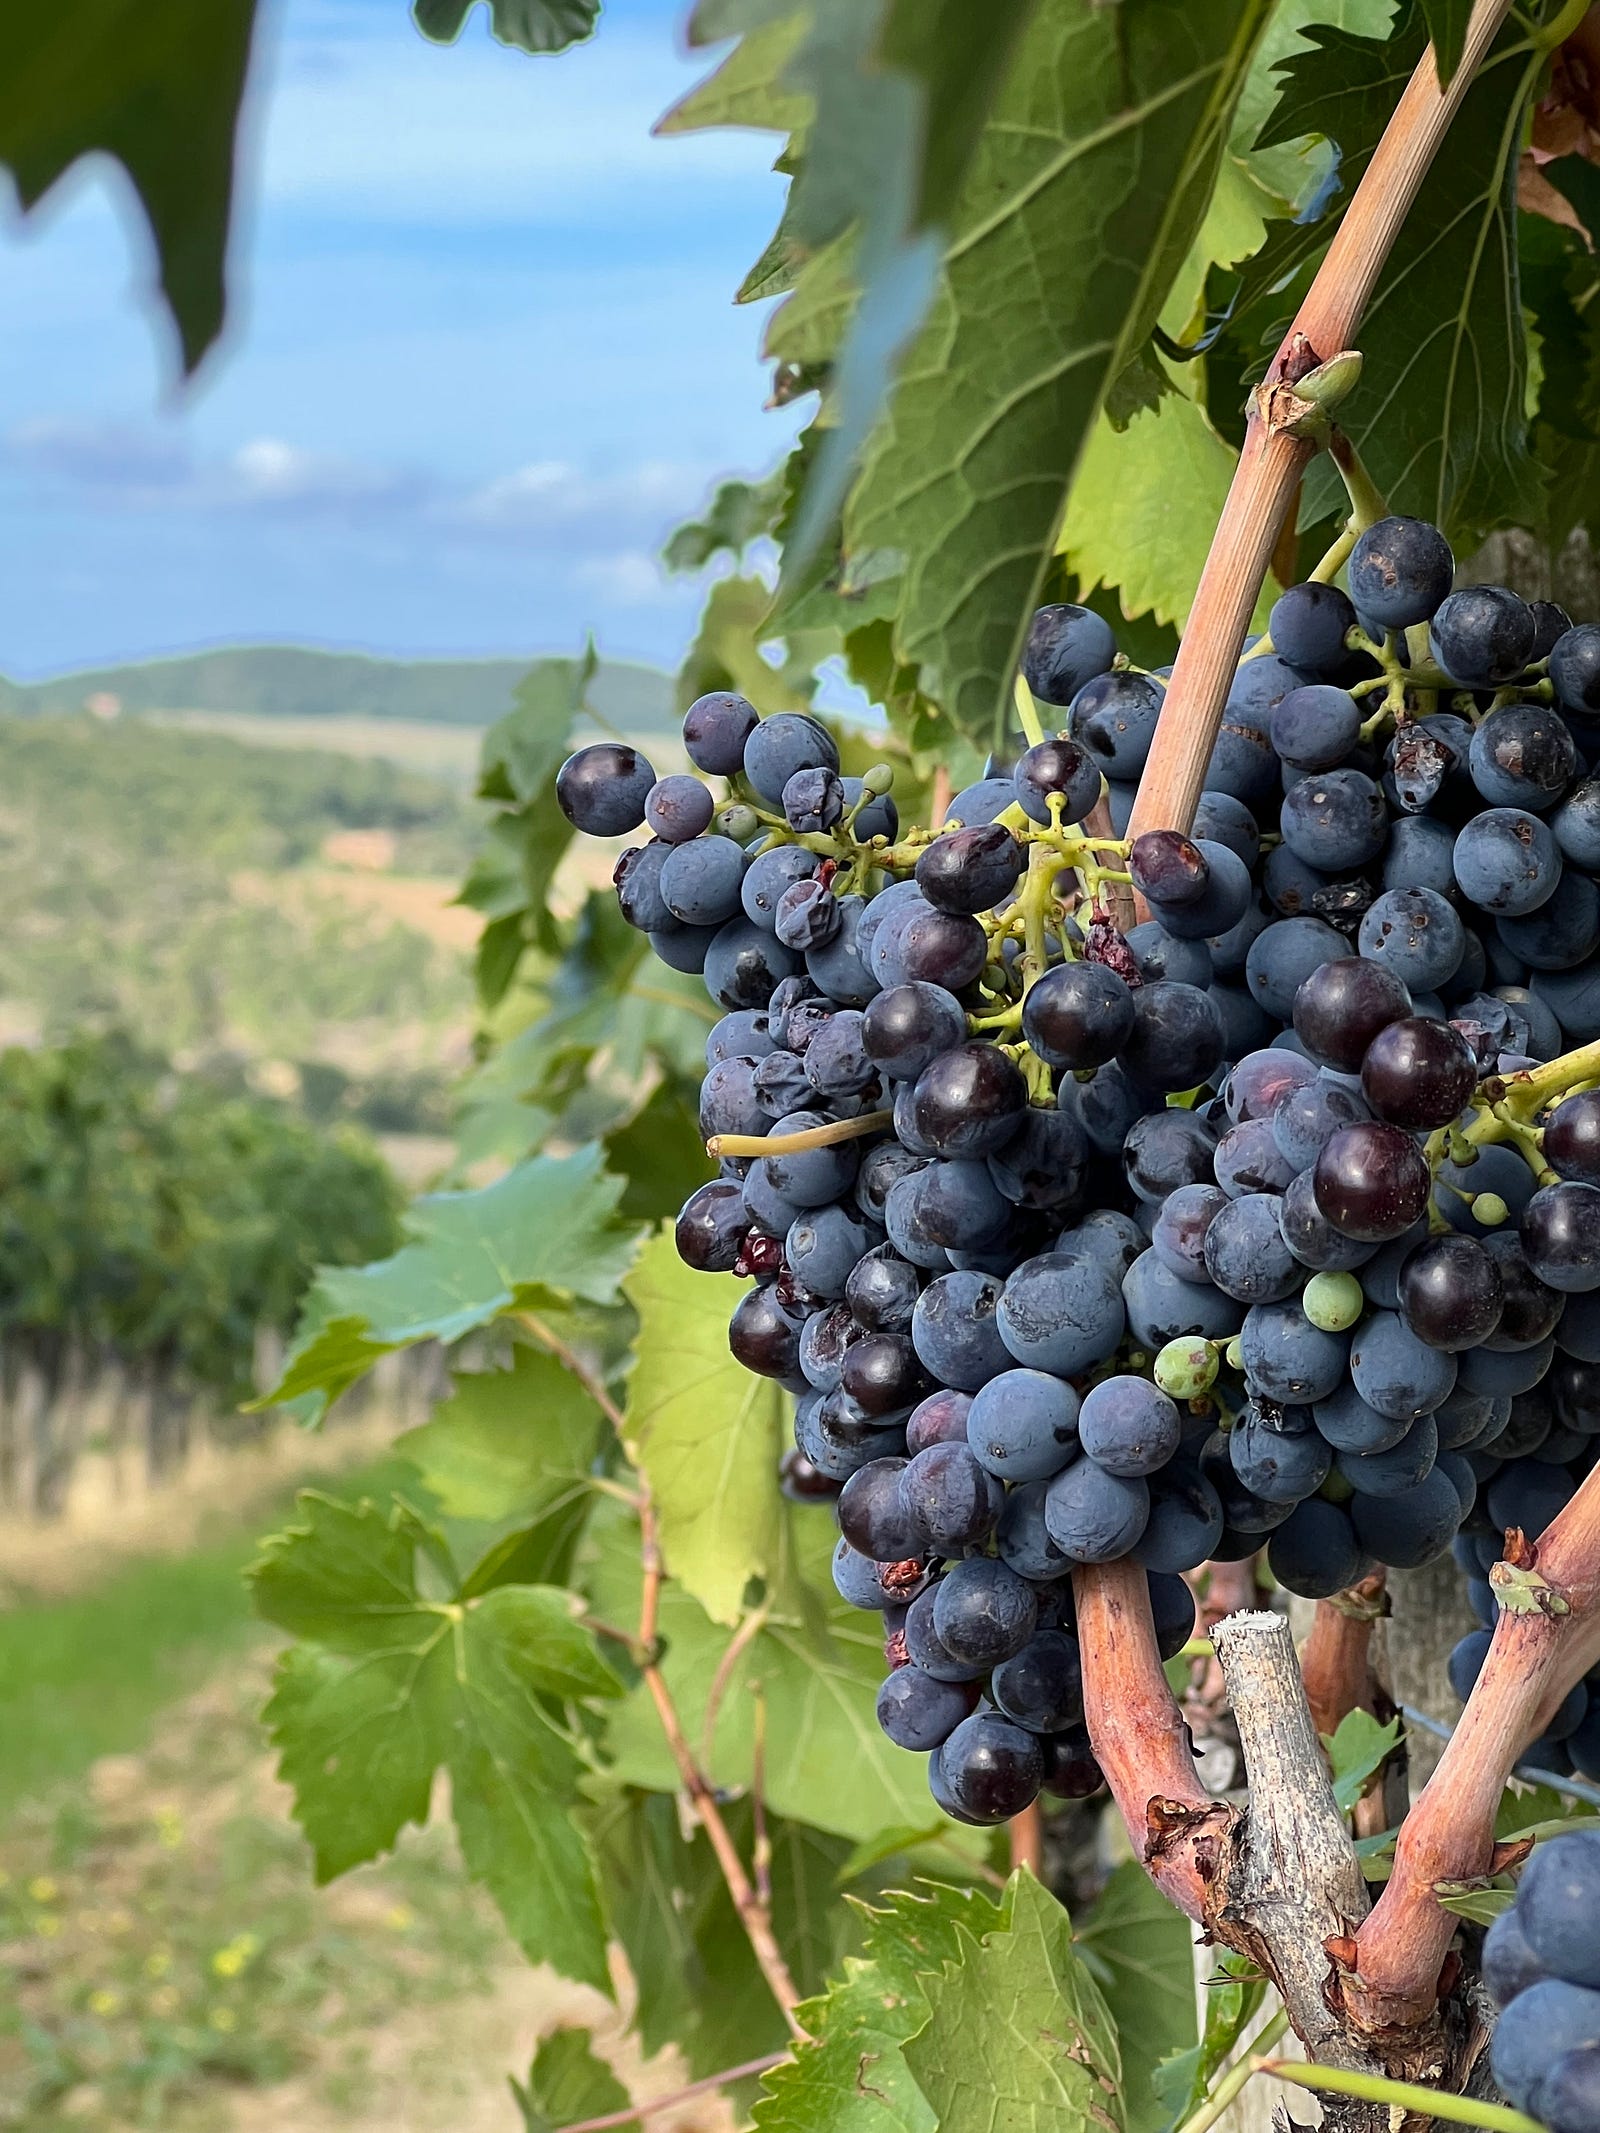 Photo of nearly ripe purple grapes on the vine in Tuscany.